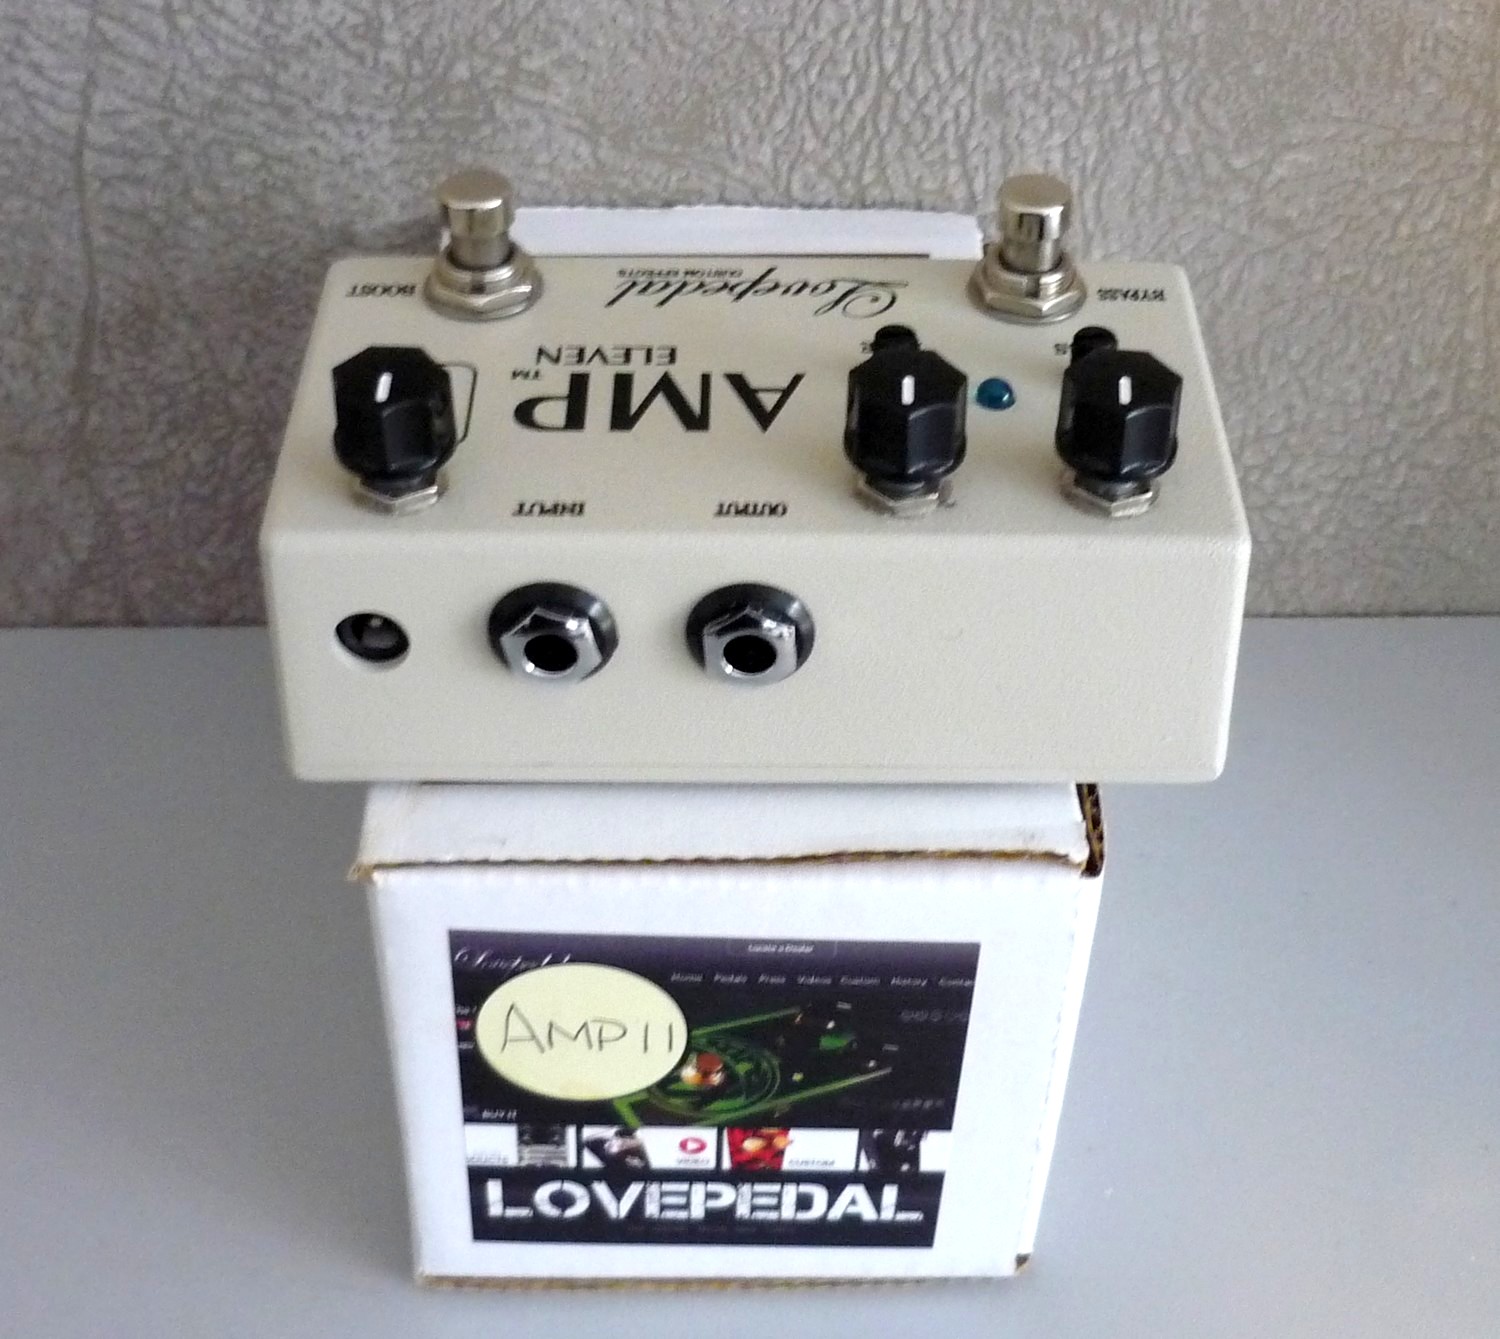 Photo Lovepedal Amp Eleven : Lovepedal Amp Eleven (24046) (#1067084